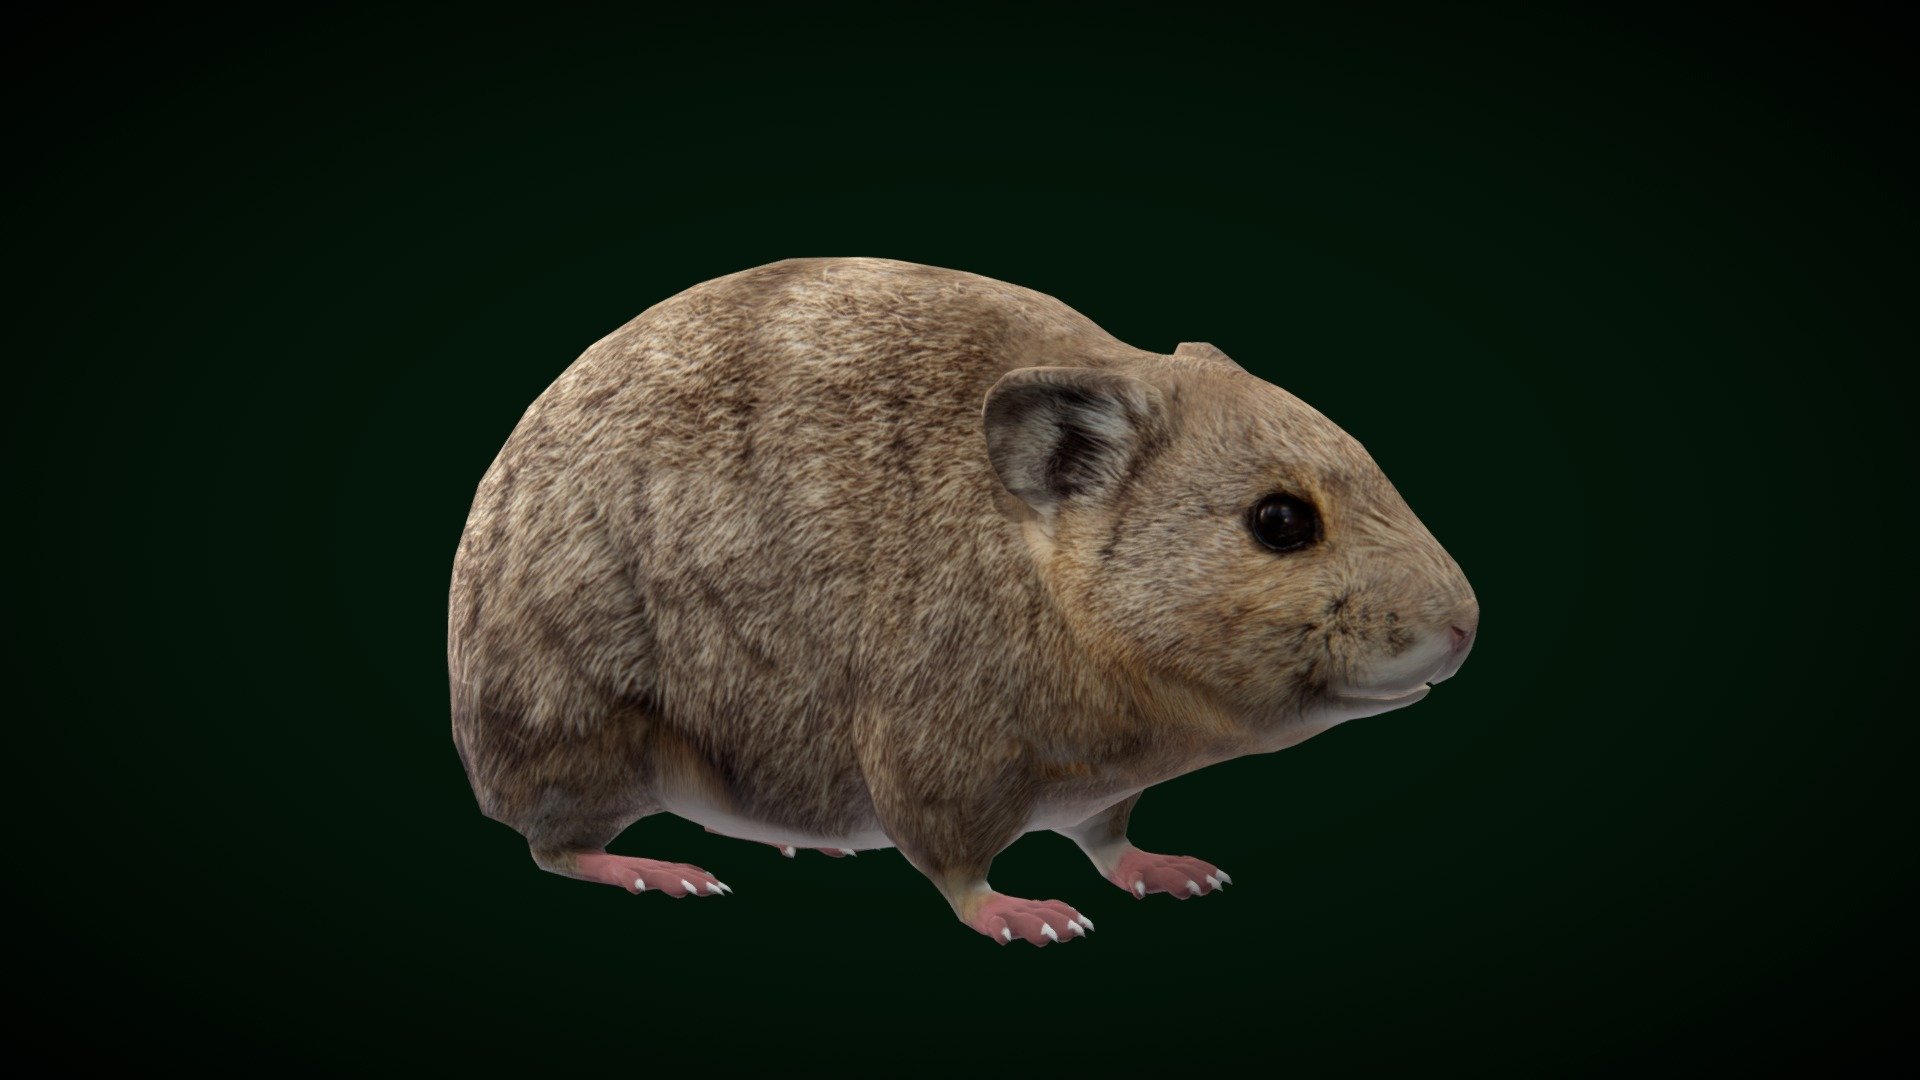 American_Pika(little Chief hares)diurnal species of pika,Niwot Ridge LTER

Ochotona princeps Animal Rodent(Herbivorous)Pet,Cute,Ochotonidae

1 Draw Calls

LowPoly

Game Ready (Asset)

Subdivision Surface Ready

15 - Animations

4K PBR Textures Material

Unreal FBX (Unreal 4,5 Plus)

Unity FBX

Blend File 3.6.5 LTS

USDZ File (AR Ready). Real Scale Dimension (Xcode ,Reality Composer, Keynote Ready)

Textures Files

GLB File (Unreal 5.1 Plus Native Support)


Gltf File ( Spark AR, Lens Studio(SnapChat) , Effector(Tiktok) , Spline, Play Canvas, Omiverse ) Compatible




Triangles -7840



Faces -3946

Edges -7894

Vertices -3951

** Diffuse, Metallic, Roughness , Normal Map ,Specular Map,AO**

The American pika, a diurnal species of pika, is found in the mountains of western North America, usually in boulder fields at or above the tree lineThey are herbivorous, smaller relatives of rabbits and hares. American pikas, known in the 19th century as &ldquo;little Chief hares